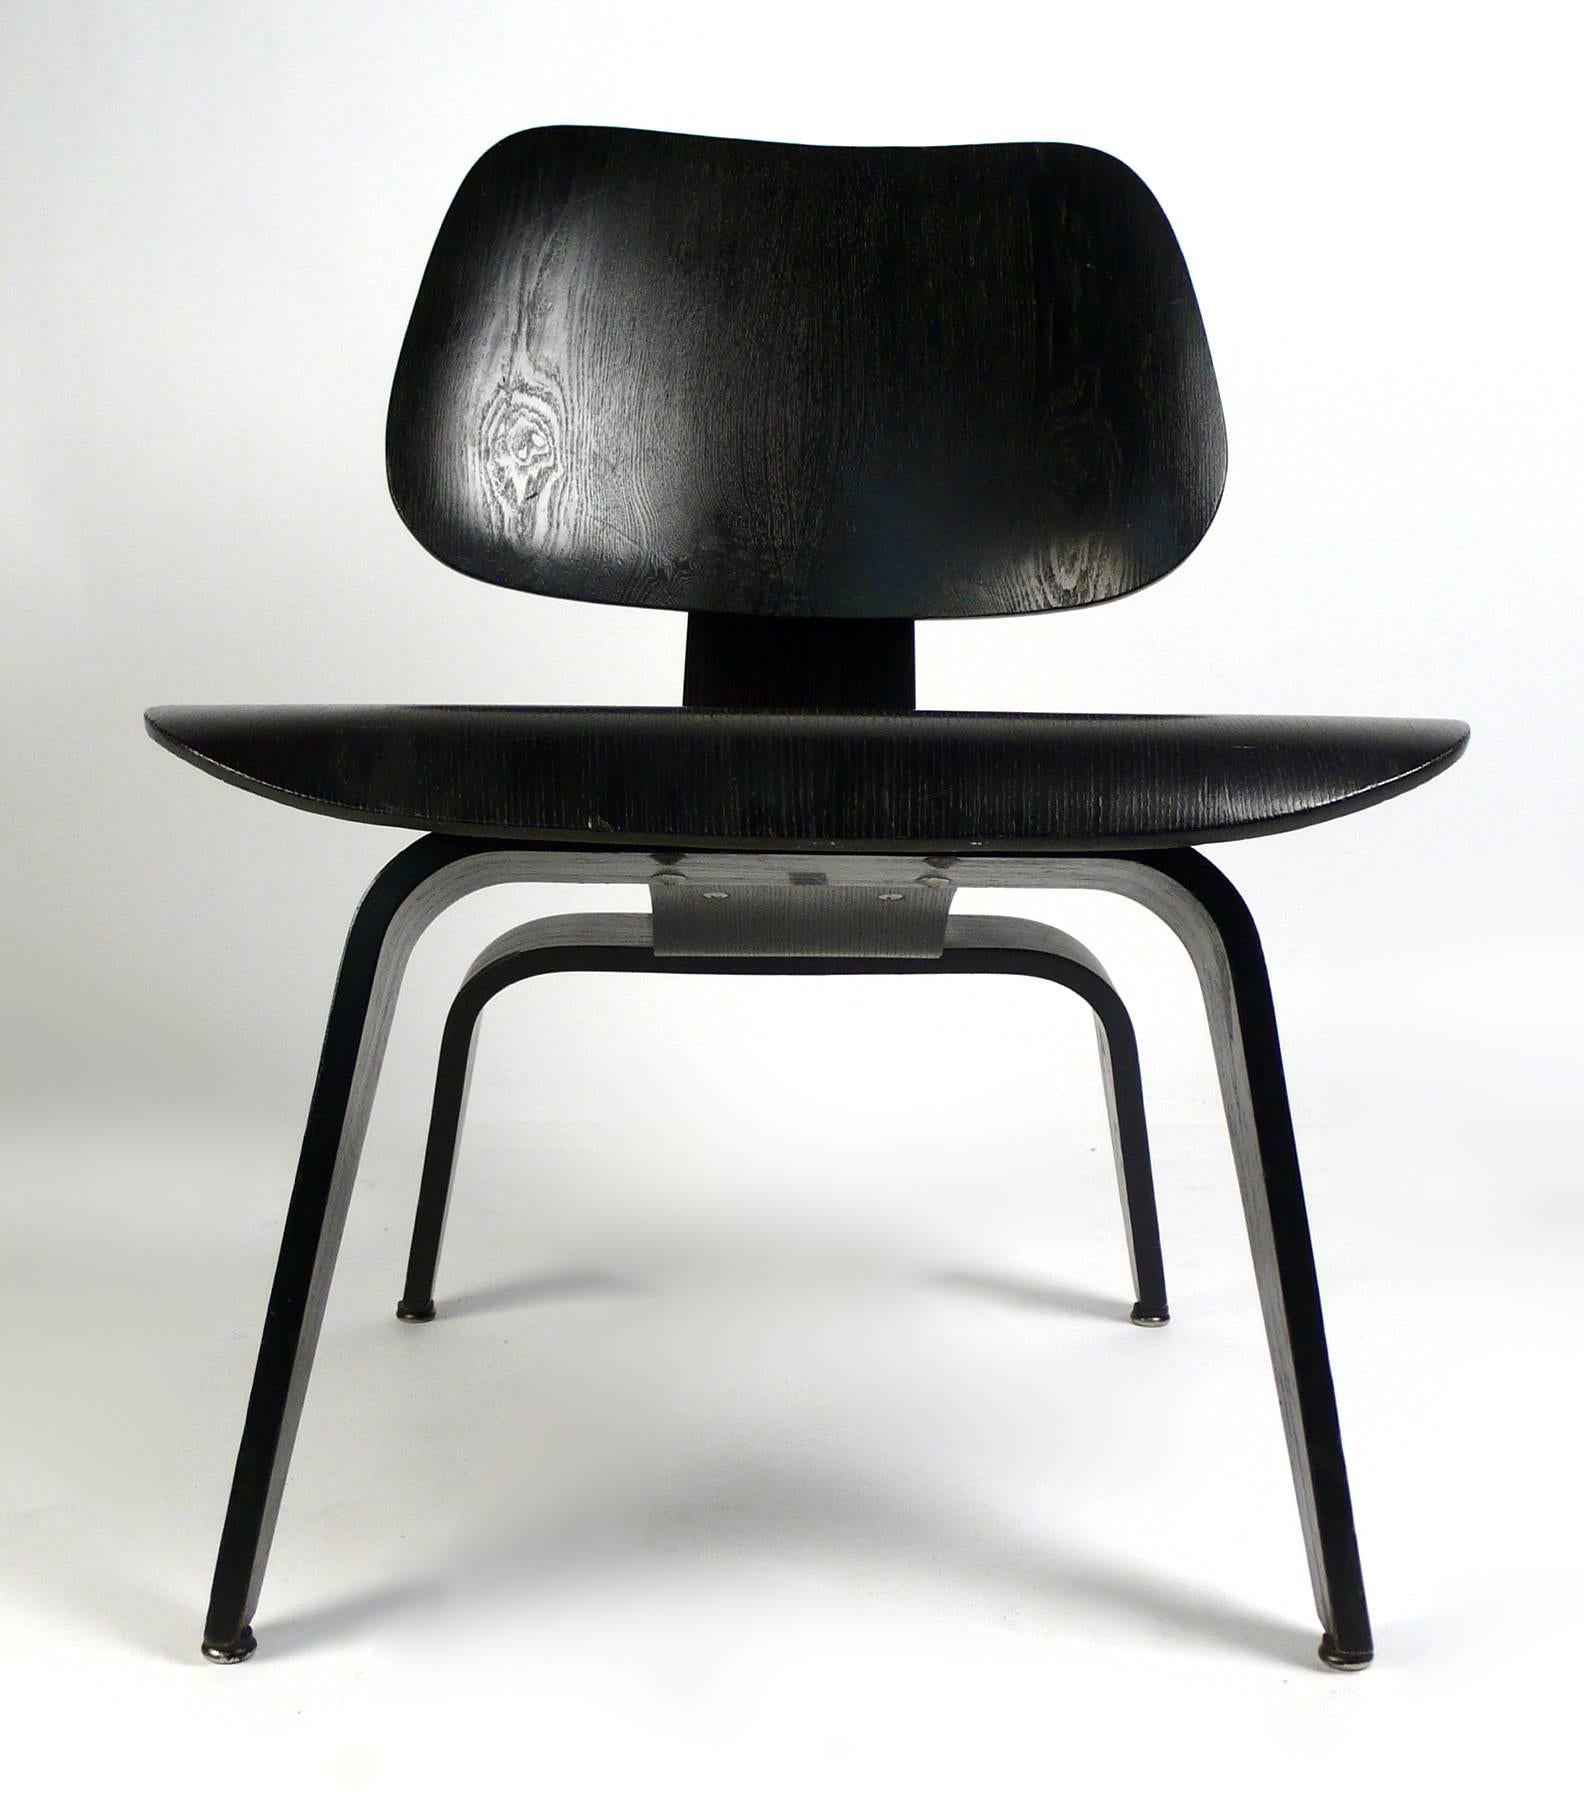 Early Production LCW designed by Charles Eames manufactured by Herman Miller - 1955. Chair is in very good original condition with the original black analine dye. 